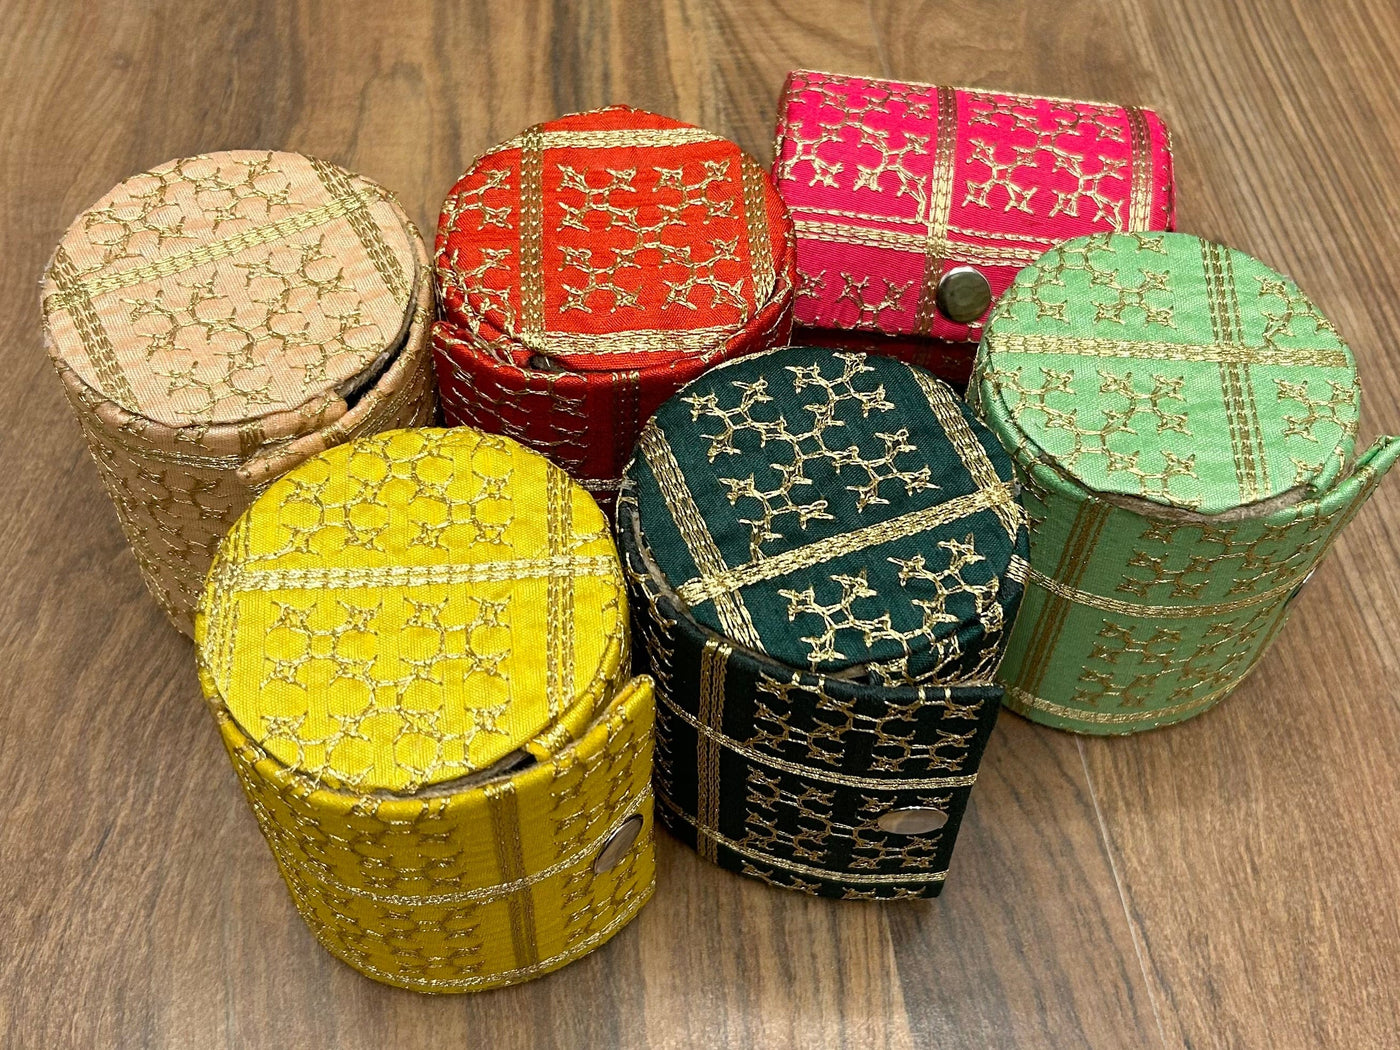 80 Rs each on buying 100+ pcs / WhatsApp at 8619550223 to order 🏷️ Bangles Box LAMANSH Gold Embroidered Bangle boxes for haldi mehendi sangeet favors for bridesmaids / Wedding return gifts 🎁 for bangles packing (4 inch size)